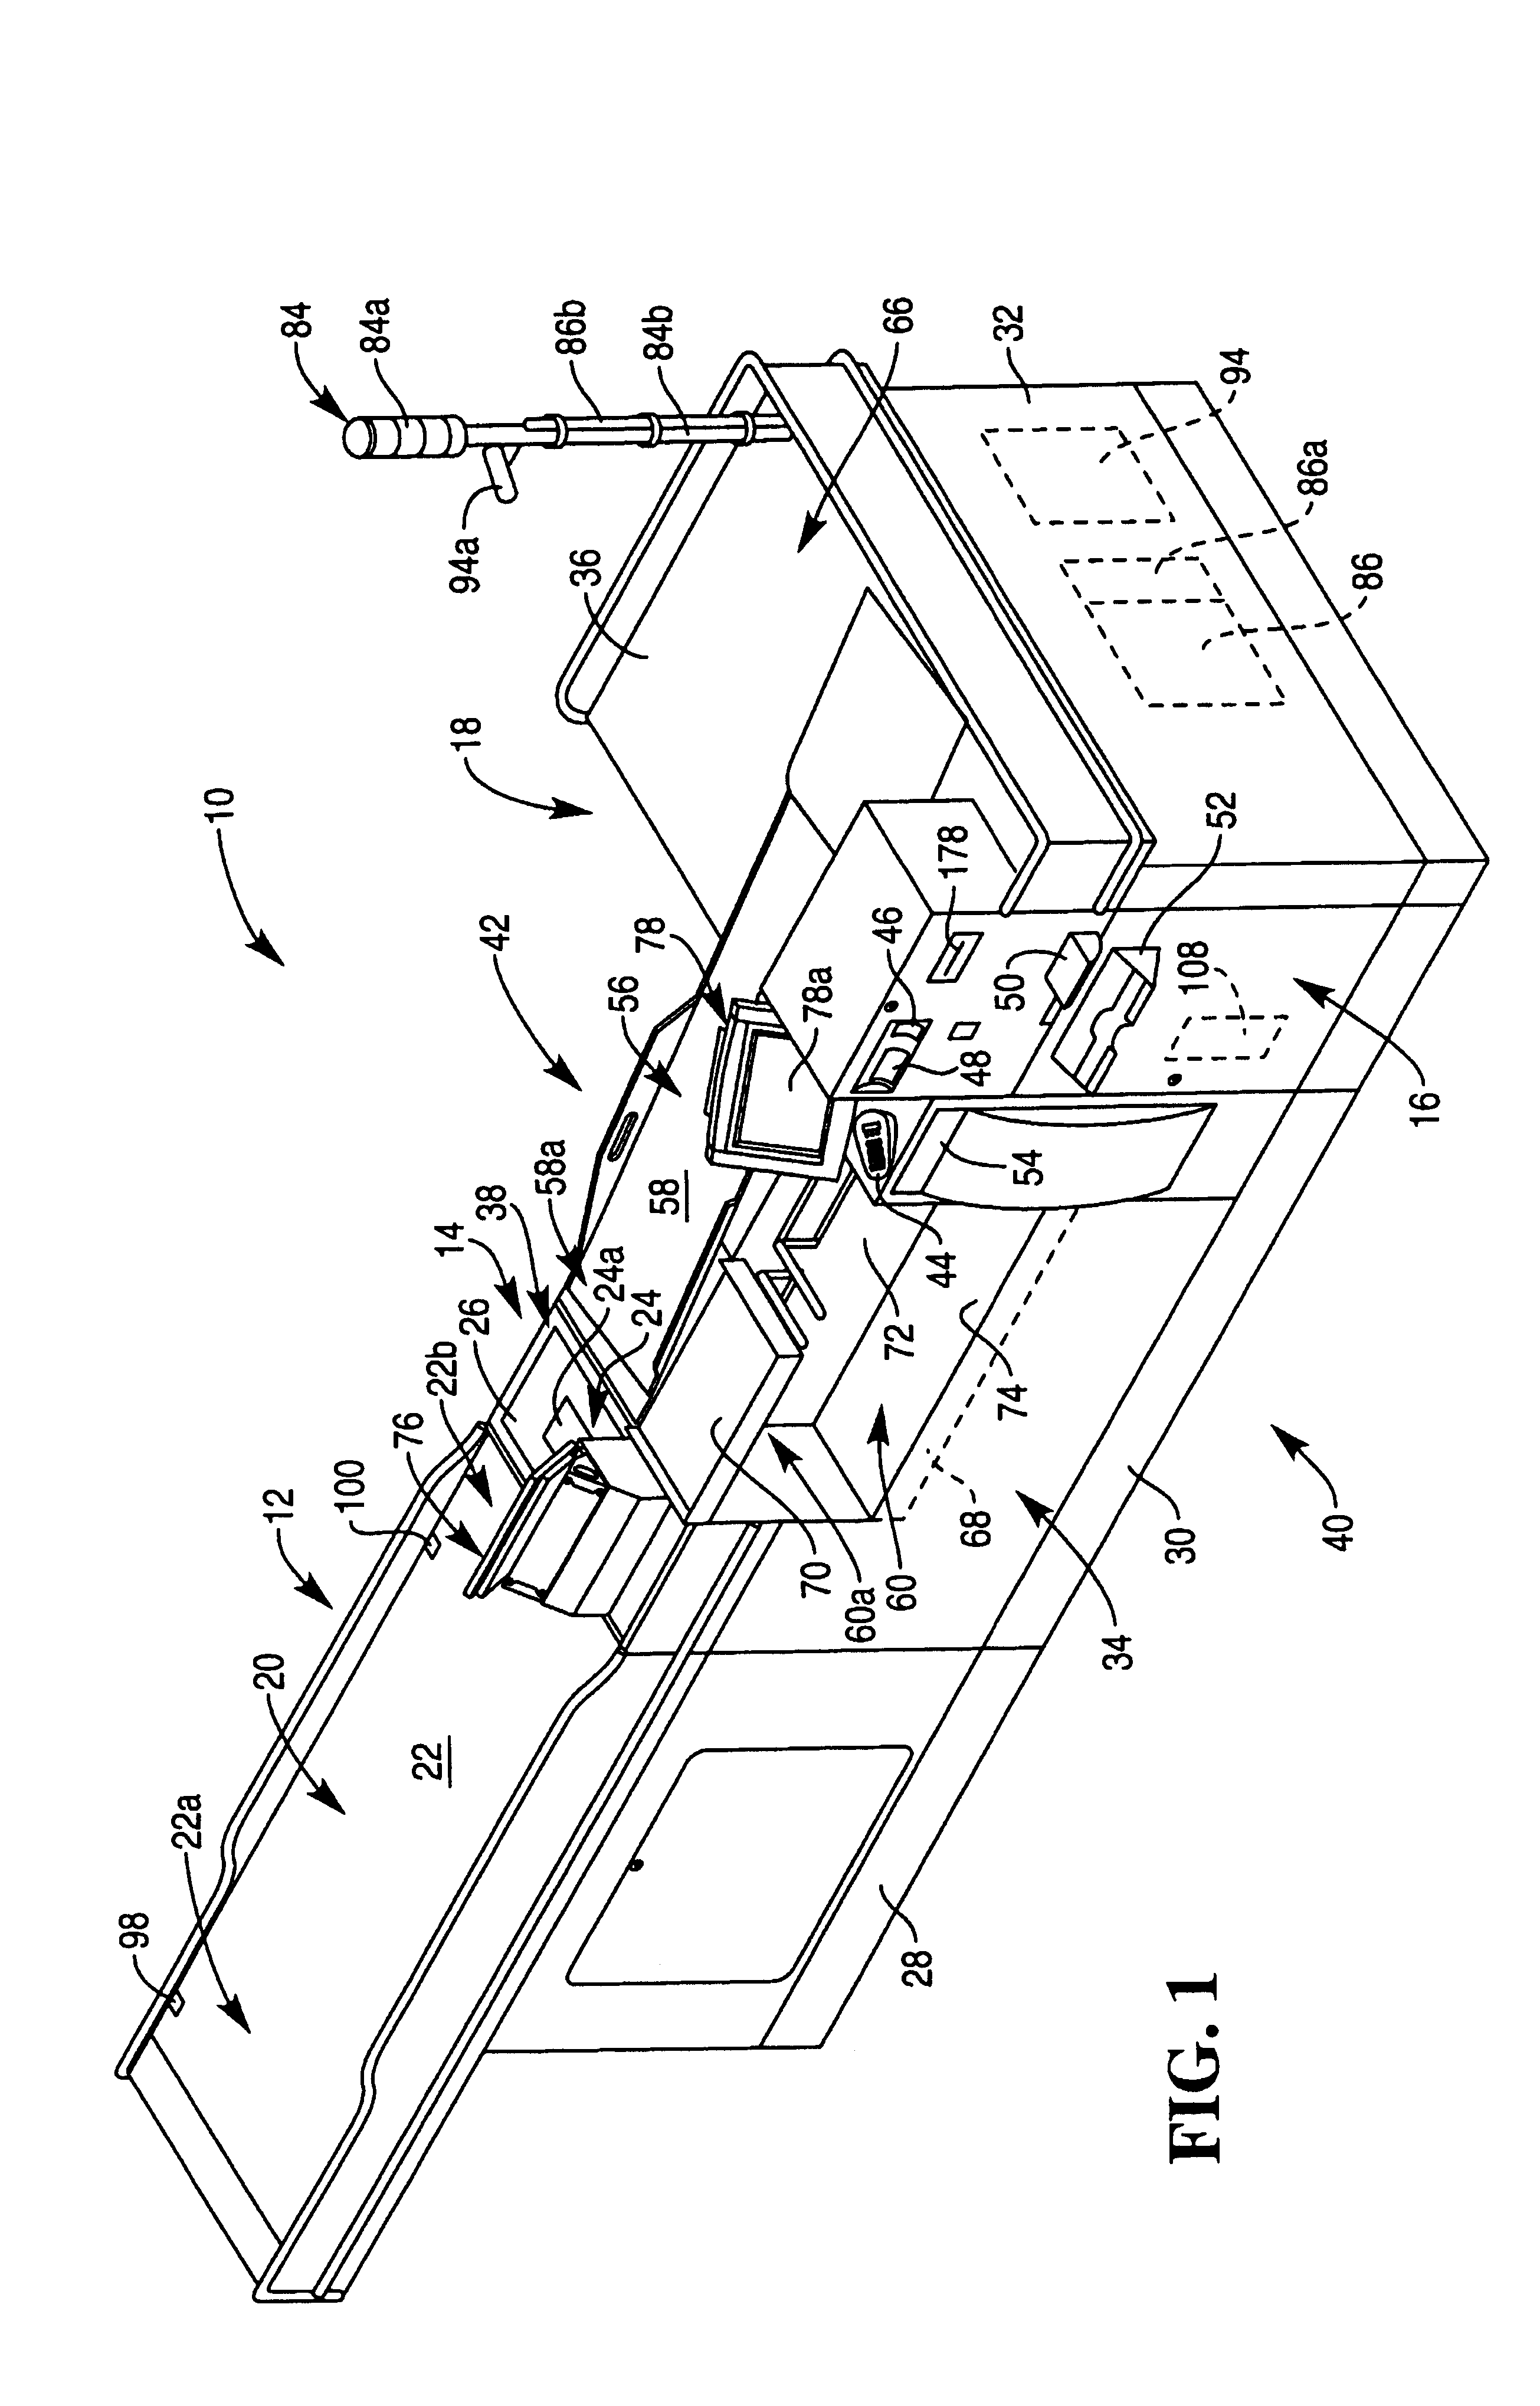 Apparatus and method for operating a checkout system having a display monitor which displays both transaction information and customer-specific messages during a checkout transaction